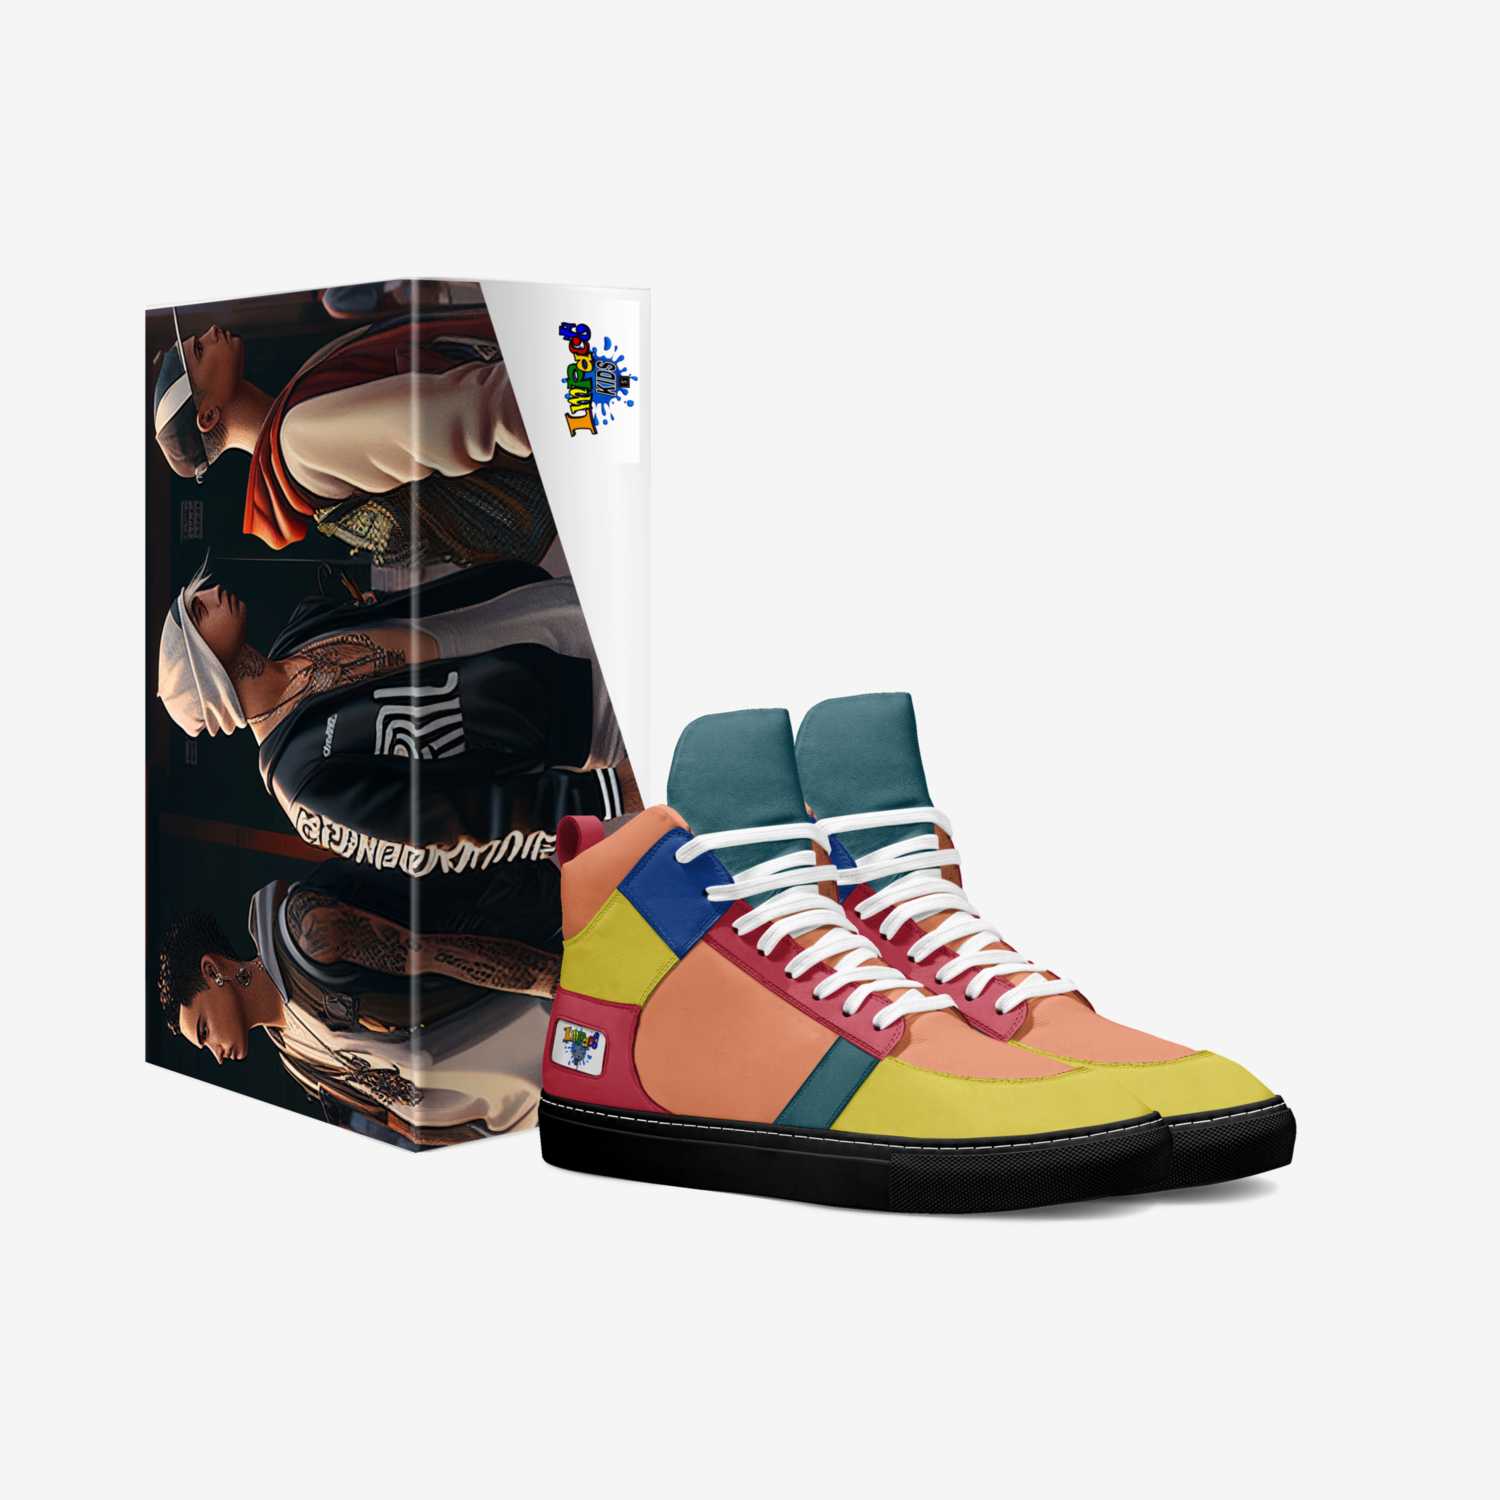 Impact kidz custom made in Italy shoes by Prentice Allen | Box view